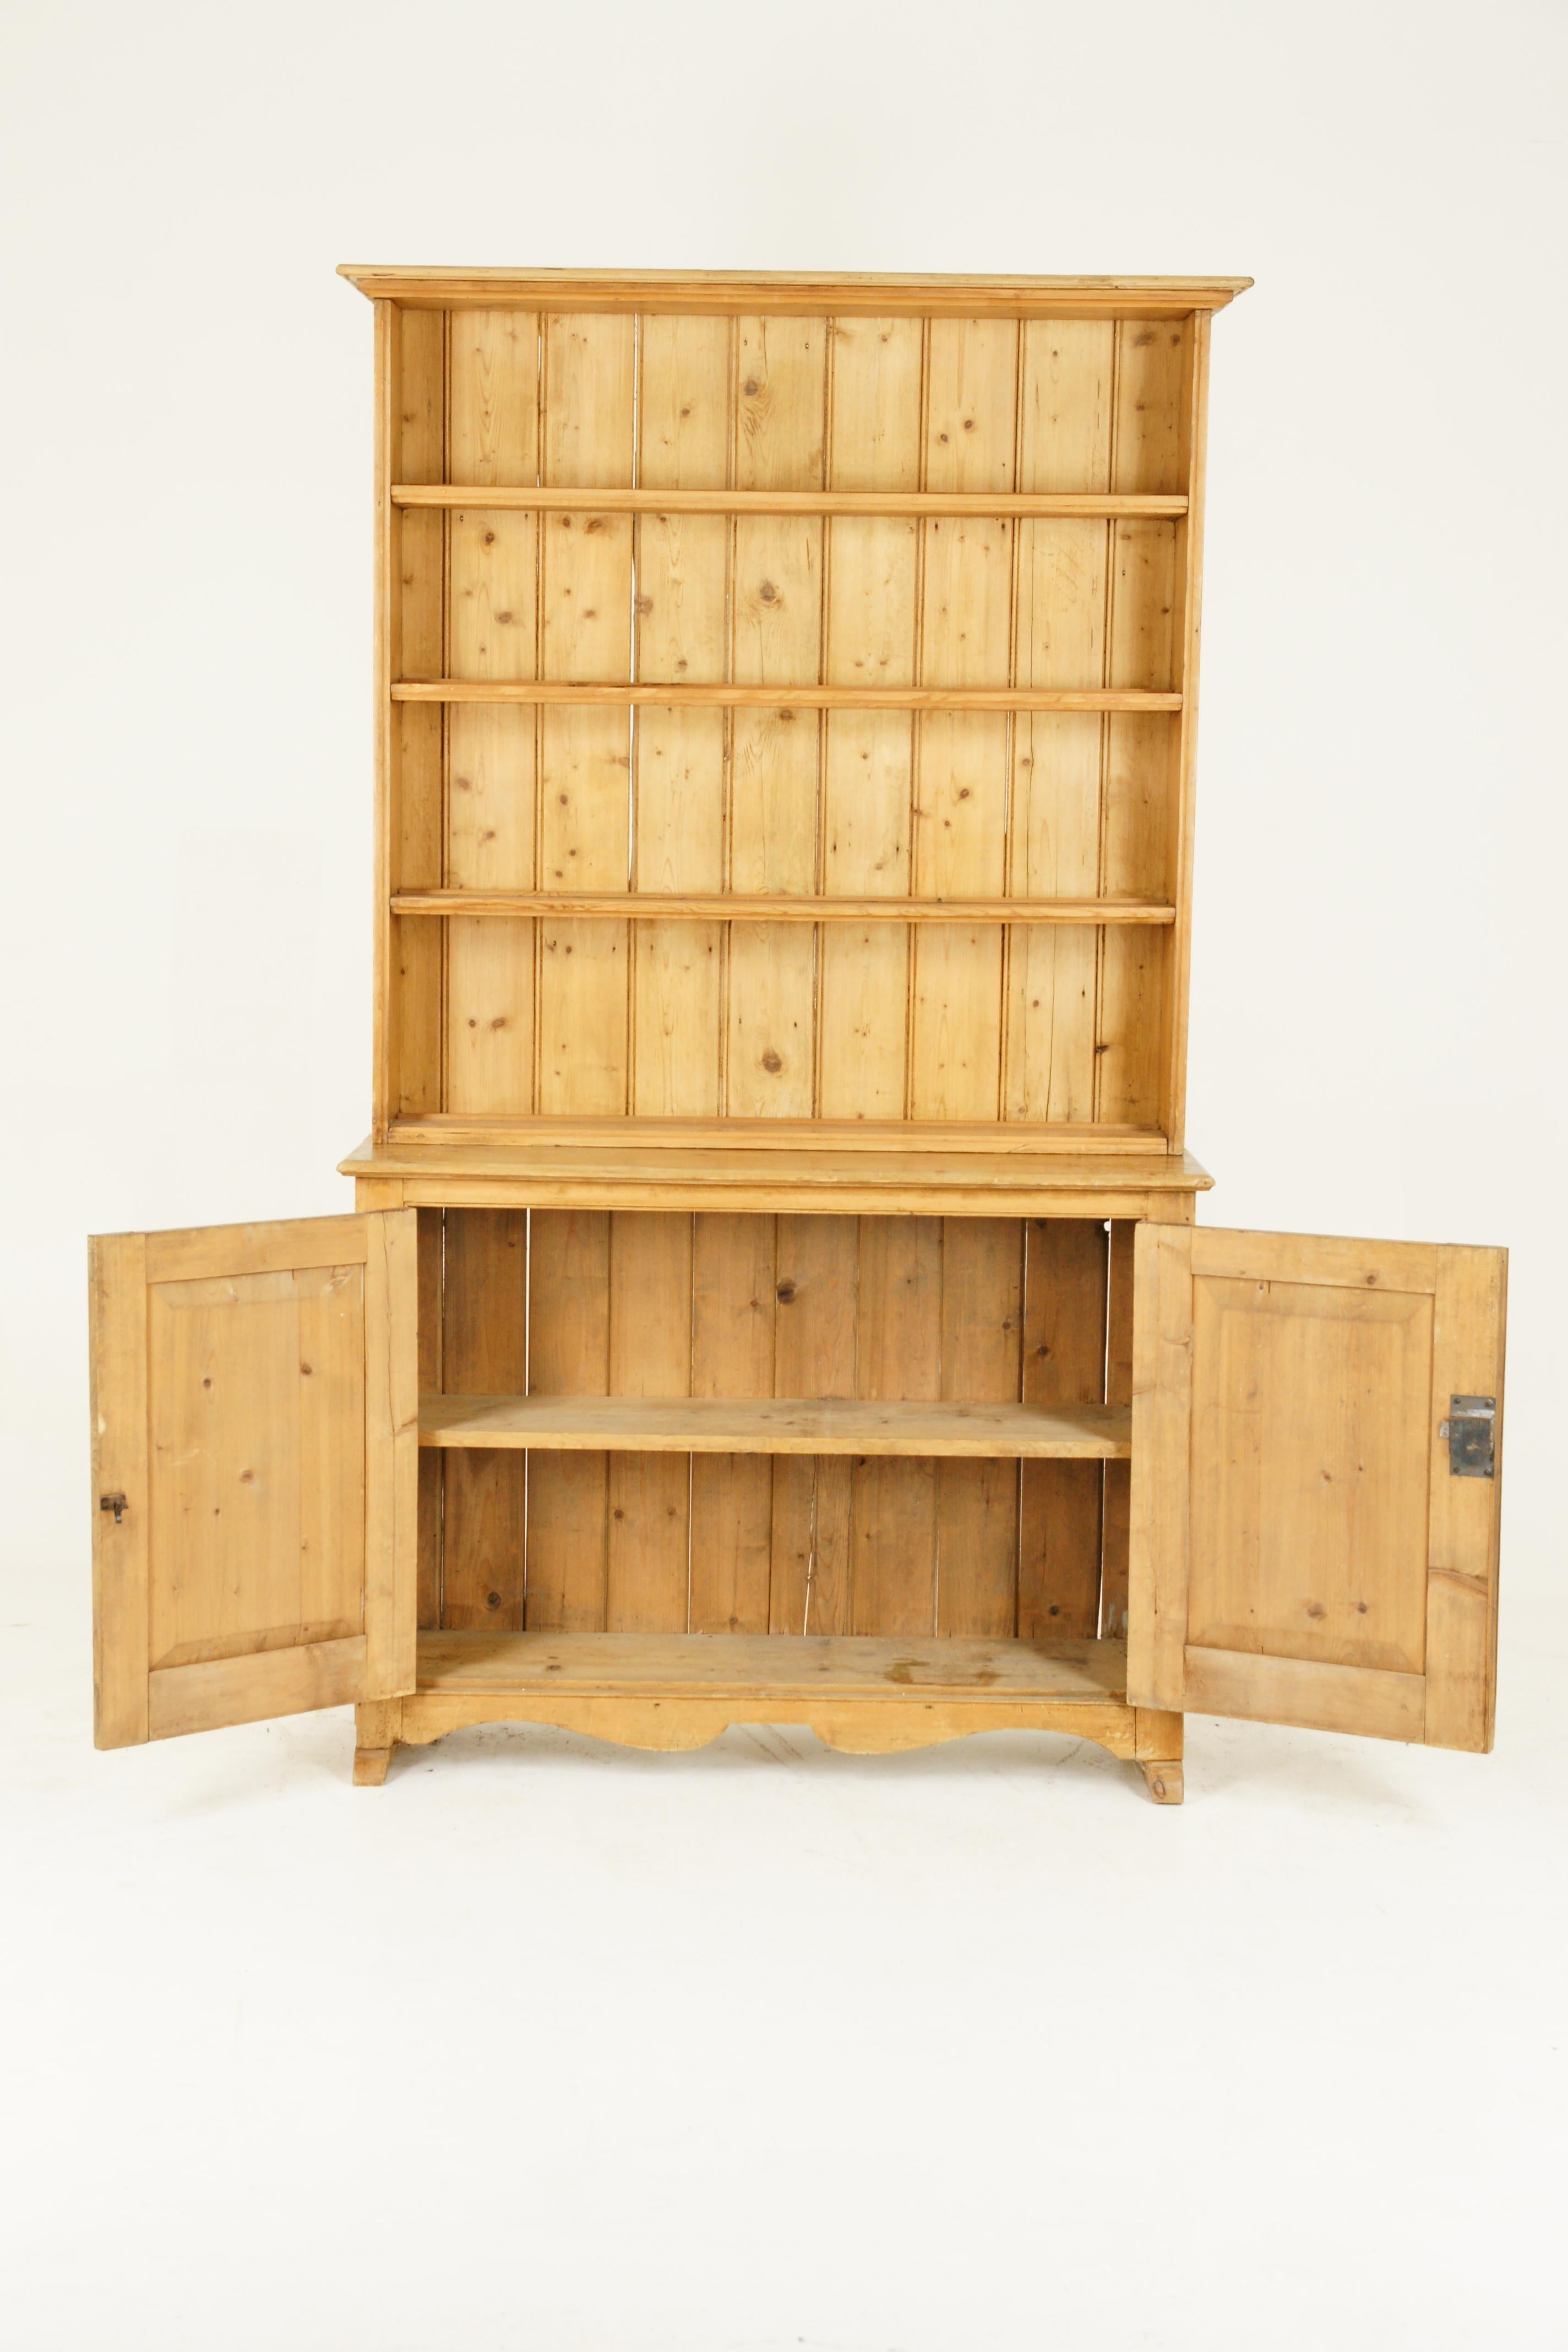 Antique sideboard, pine welsh dresser, farmhouse sideboard, country kitchen, antique furniture, Scotland 1900, B1521

Scotland 1900
Solid pine
Original finish
Cornice above
Four fixed shelves with plate rails
Bottom with a pair of paneled